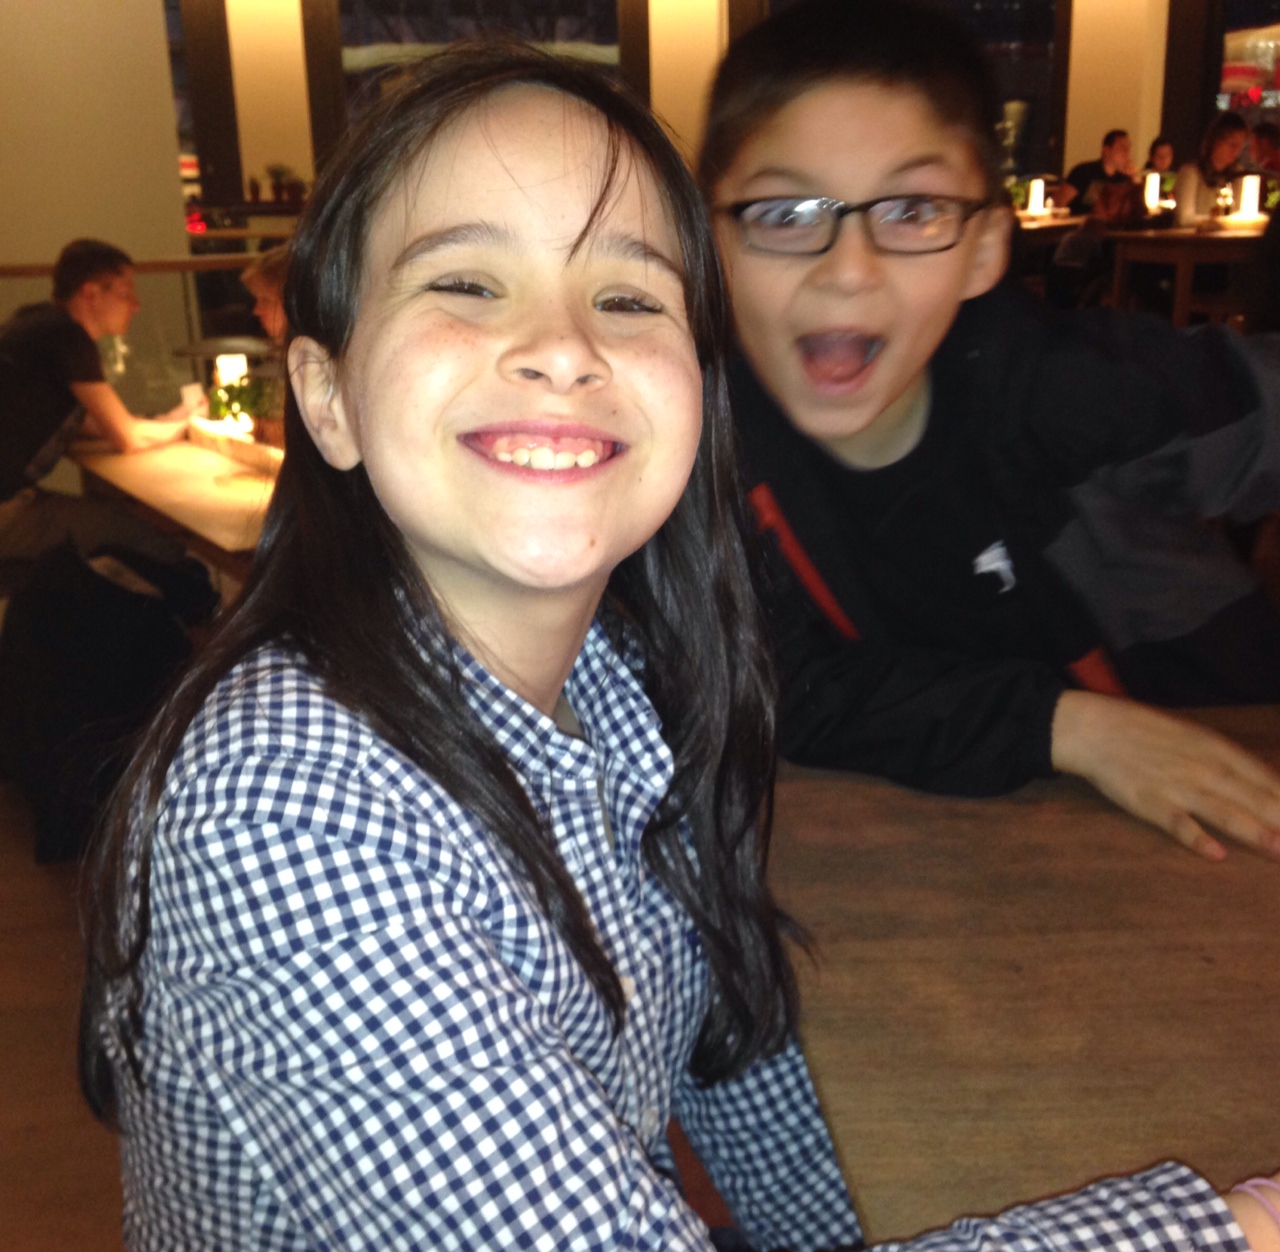 Squishy (Ashlyn) with Tommy the photo-bomber.  Great kids!